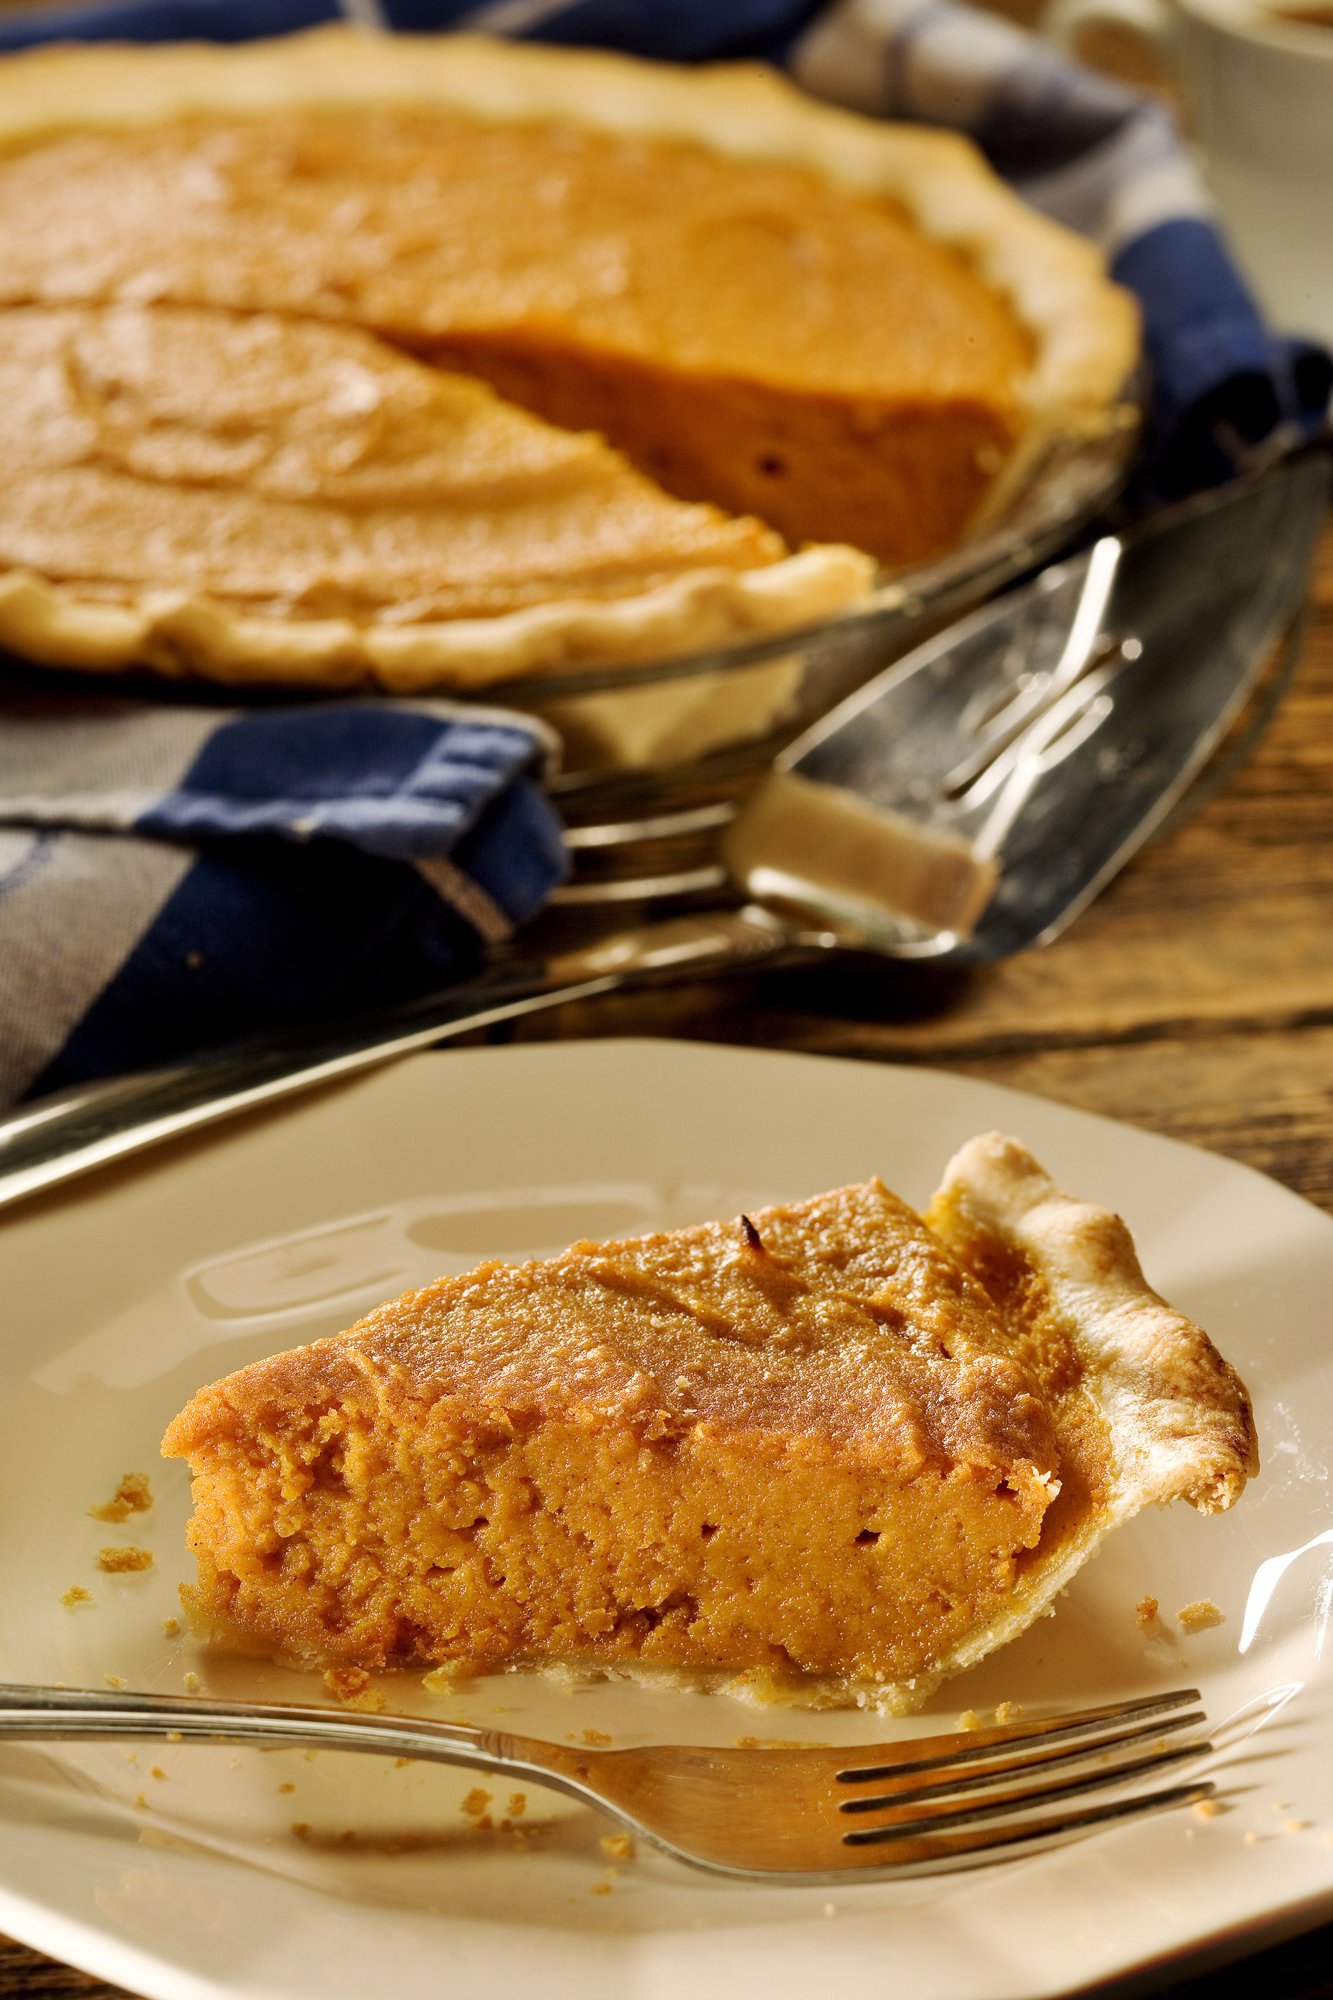 From the book, 'Food For The Soul,' a sweet potato pie. Swee